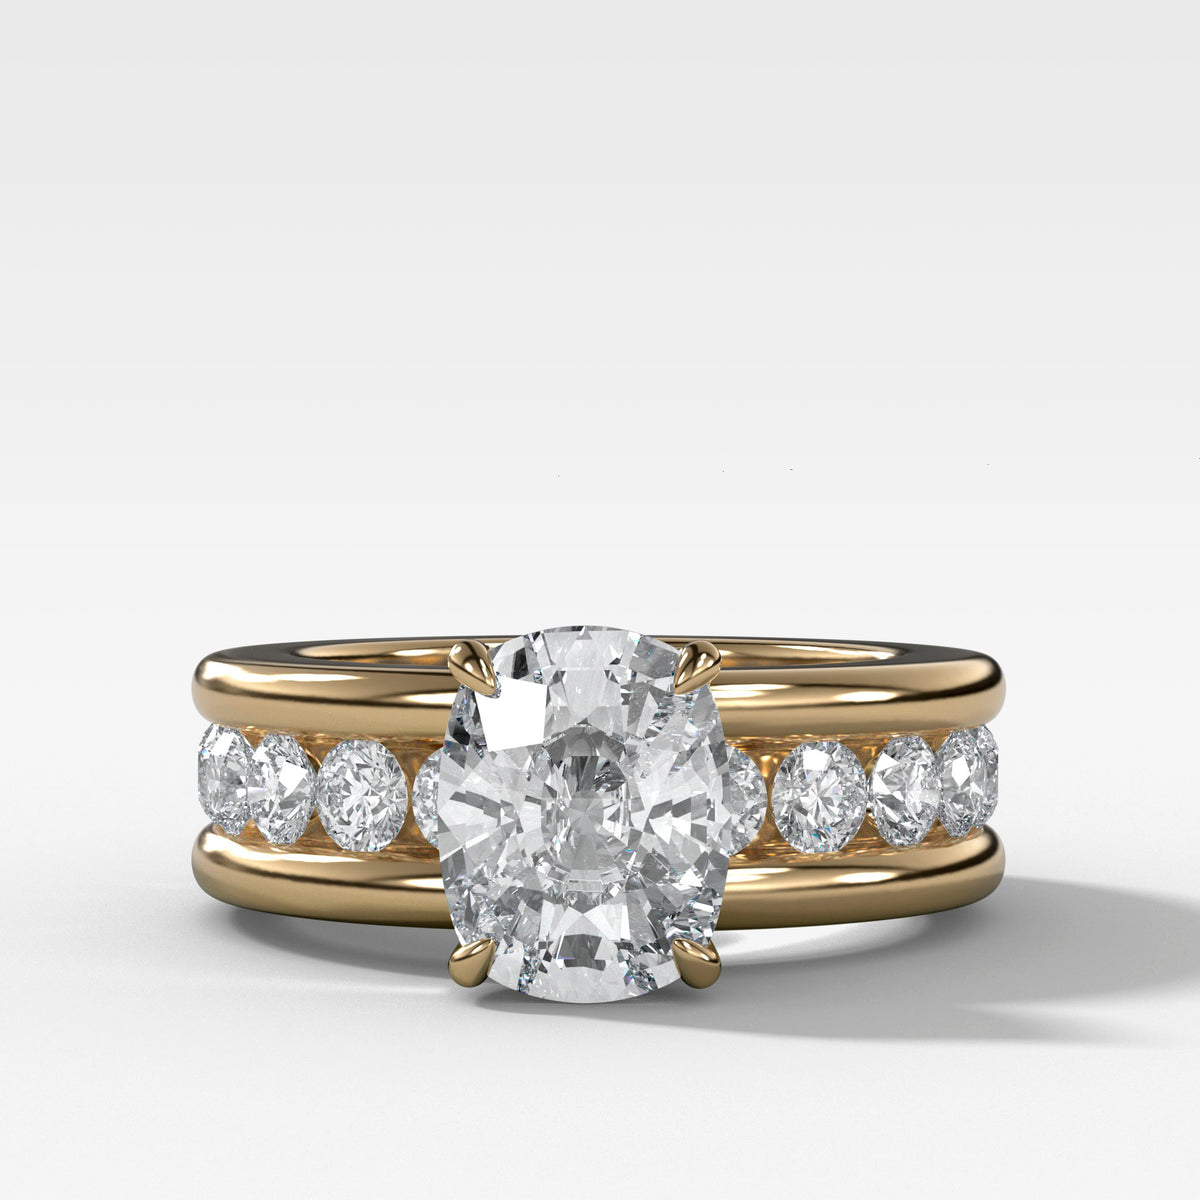 Chunky Channel Set Engagement Ring with Elongated Cushion Cut Diamond